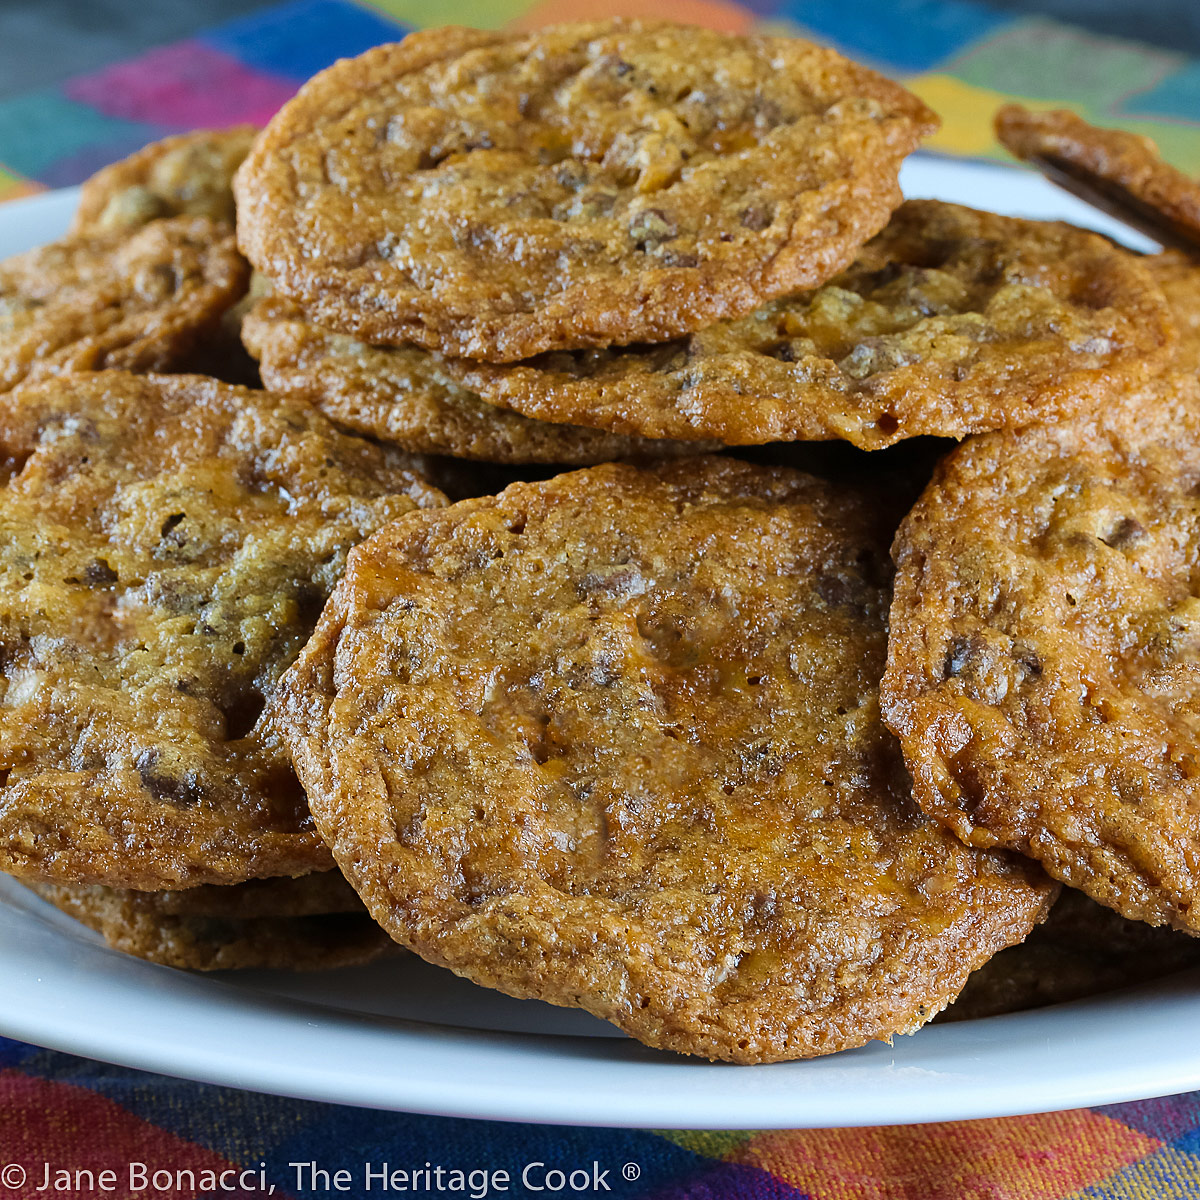 Pile of baked cookies on a white plate with a brightly colored plaid cloth underneath. Easy Toffee Chocolate Chip Cookies (Gluten Free) © 2022 Jane Bonacci, The Heritage Cook. 